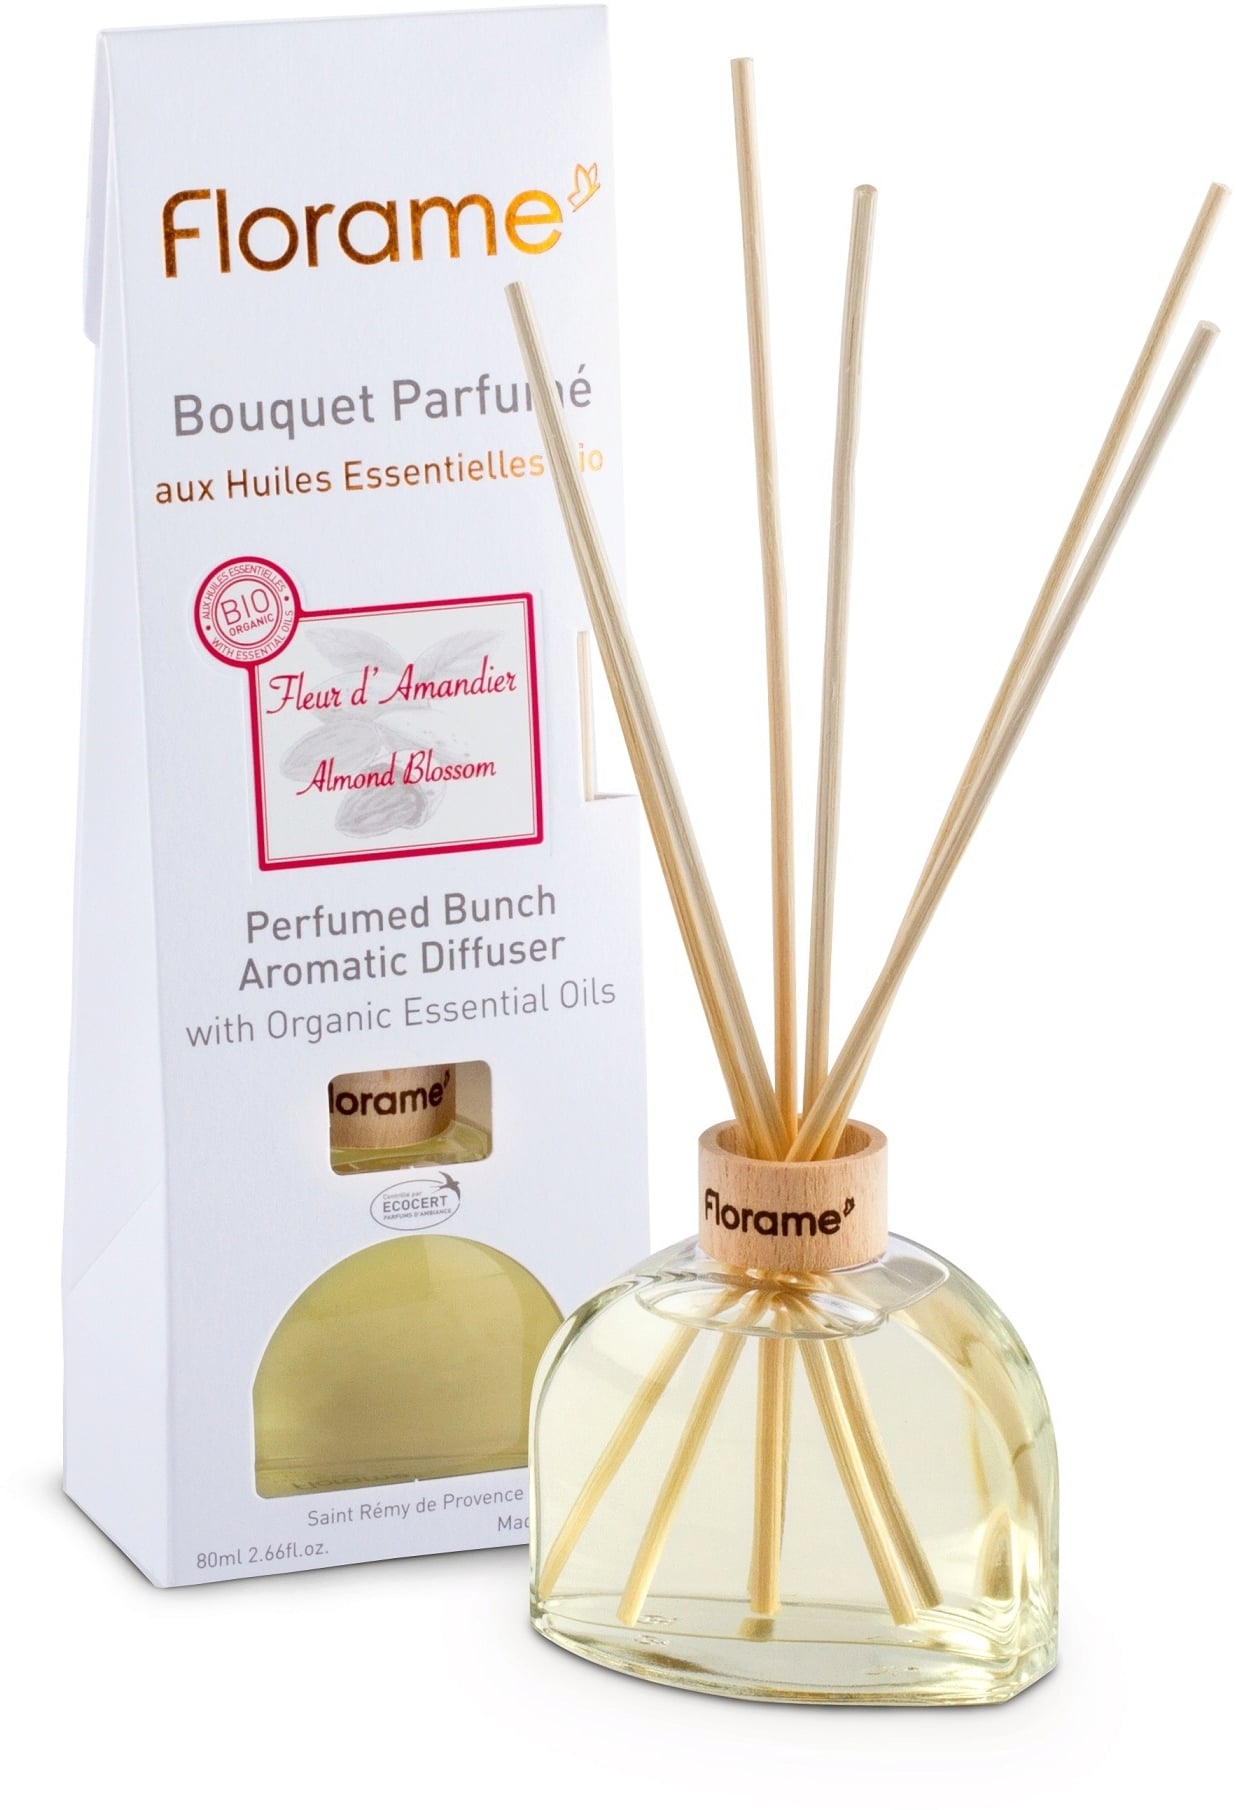 Almond Blossom Perfumed Bunched Aromatic Diffuser - 80 ml